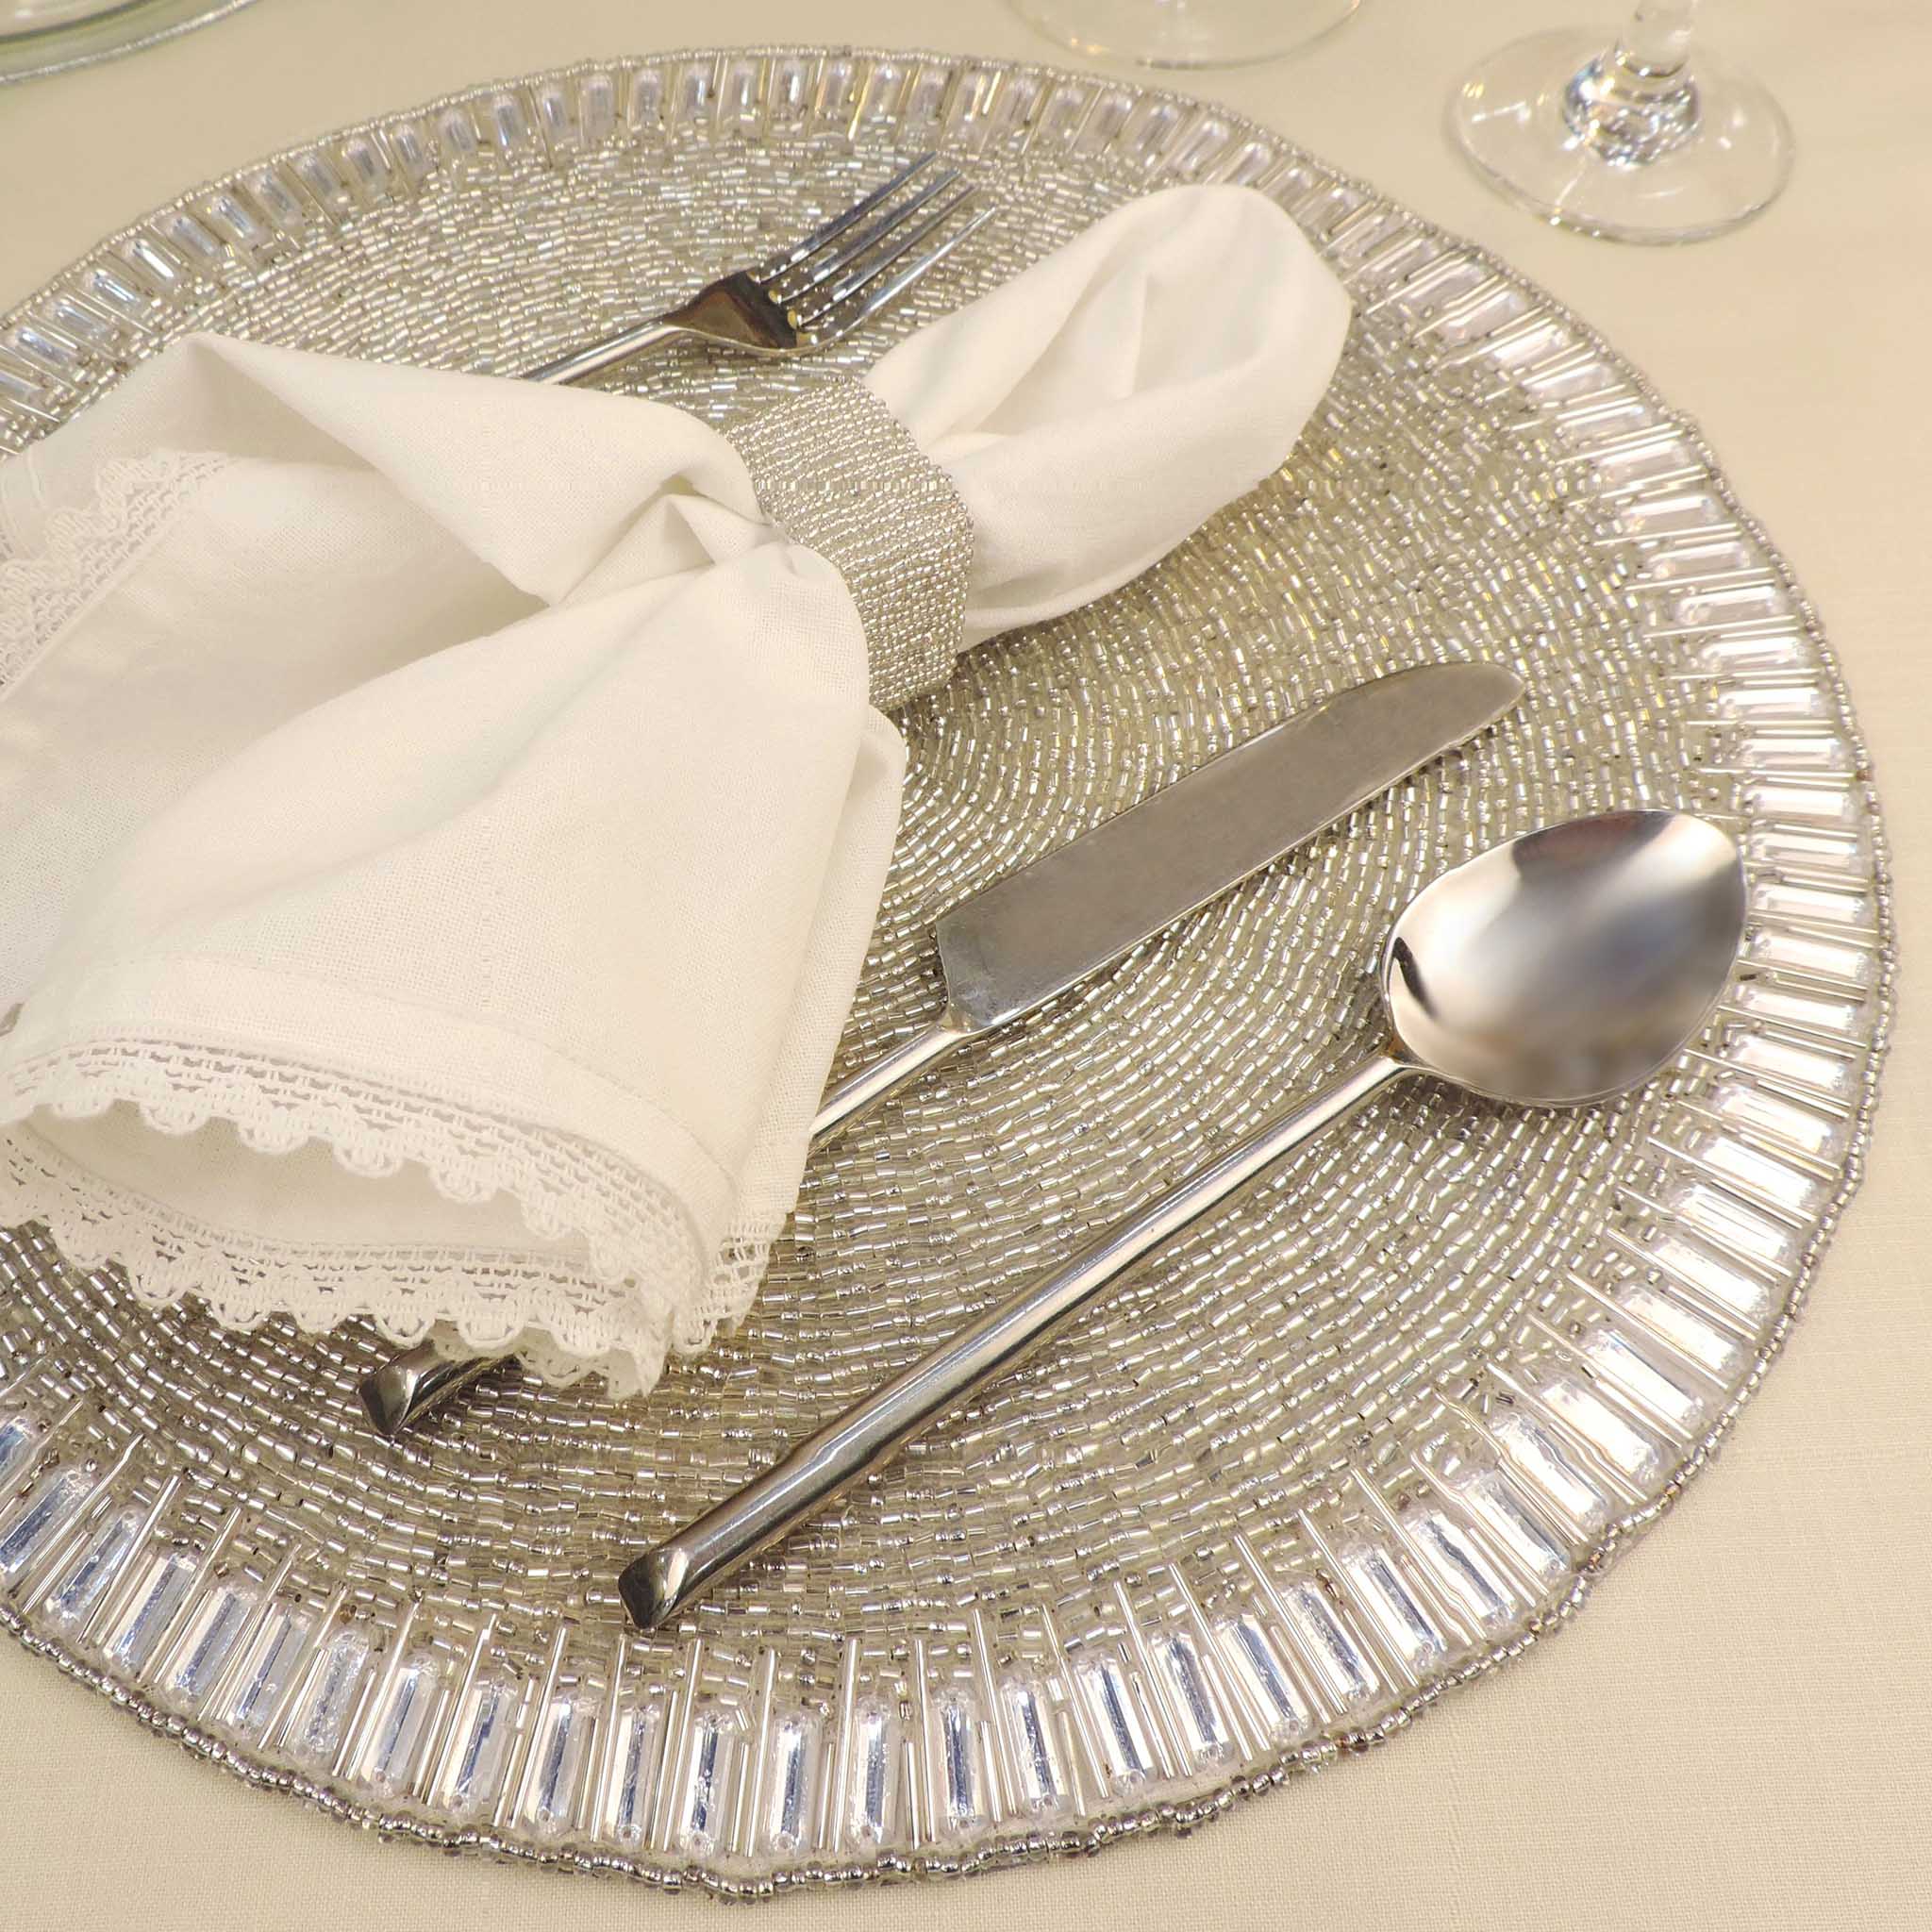 Glam Crystal Bead Embroidered Placemat in Cream Silver, Set of 2/4